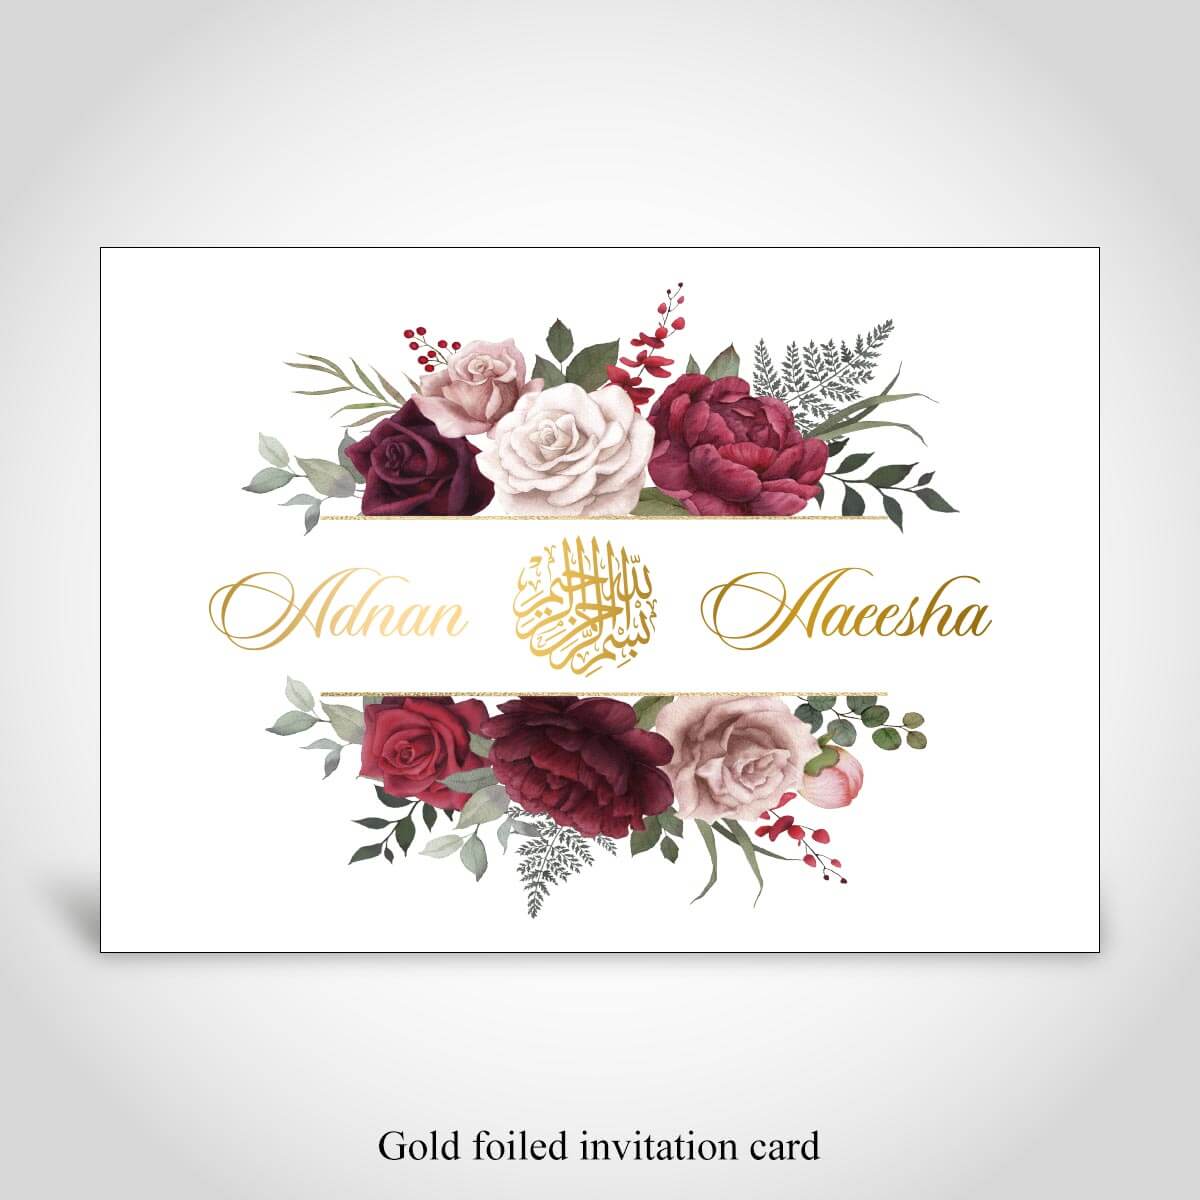 Muslim Wedding Invitations: 5 Styles For Your Big Day CardFusion